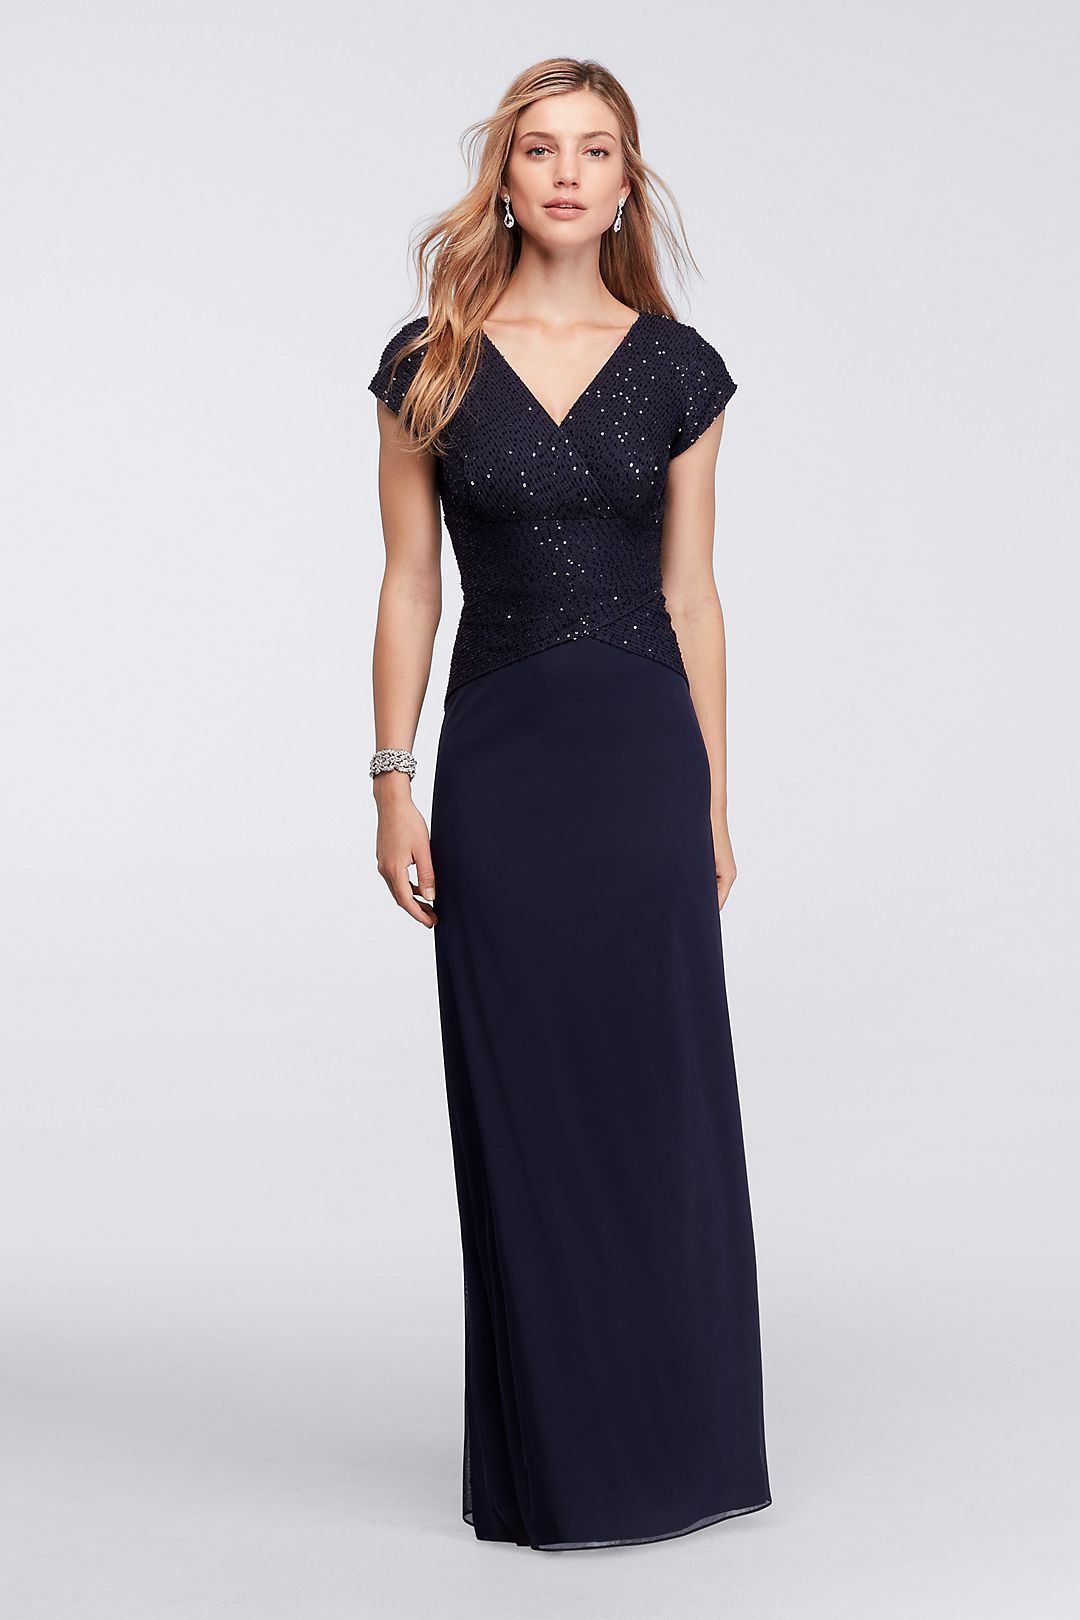 Long Cap-Sleeve Dress with Sequin Lace Bodice Image 1